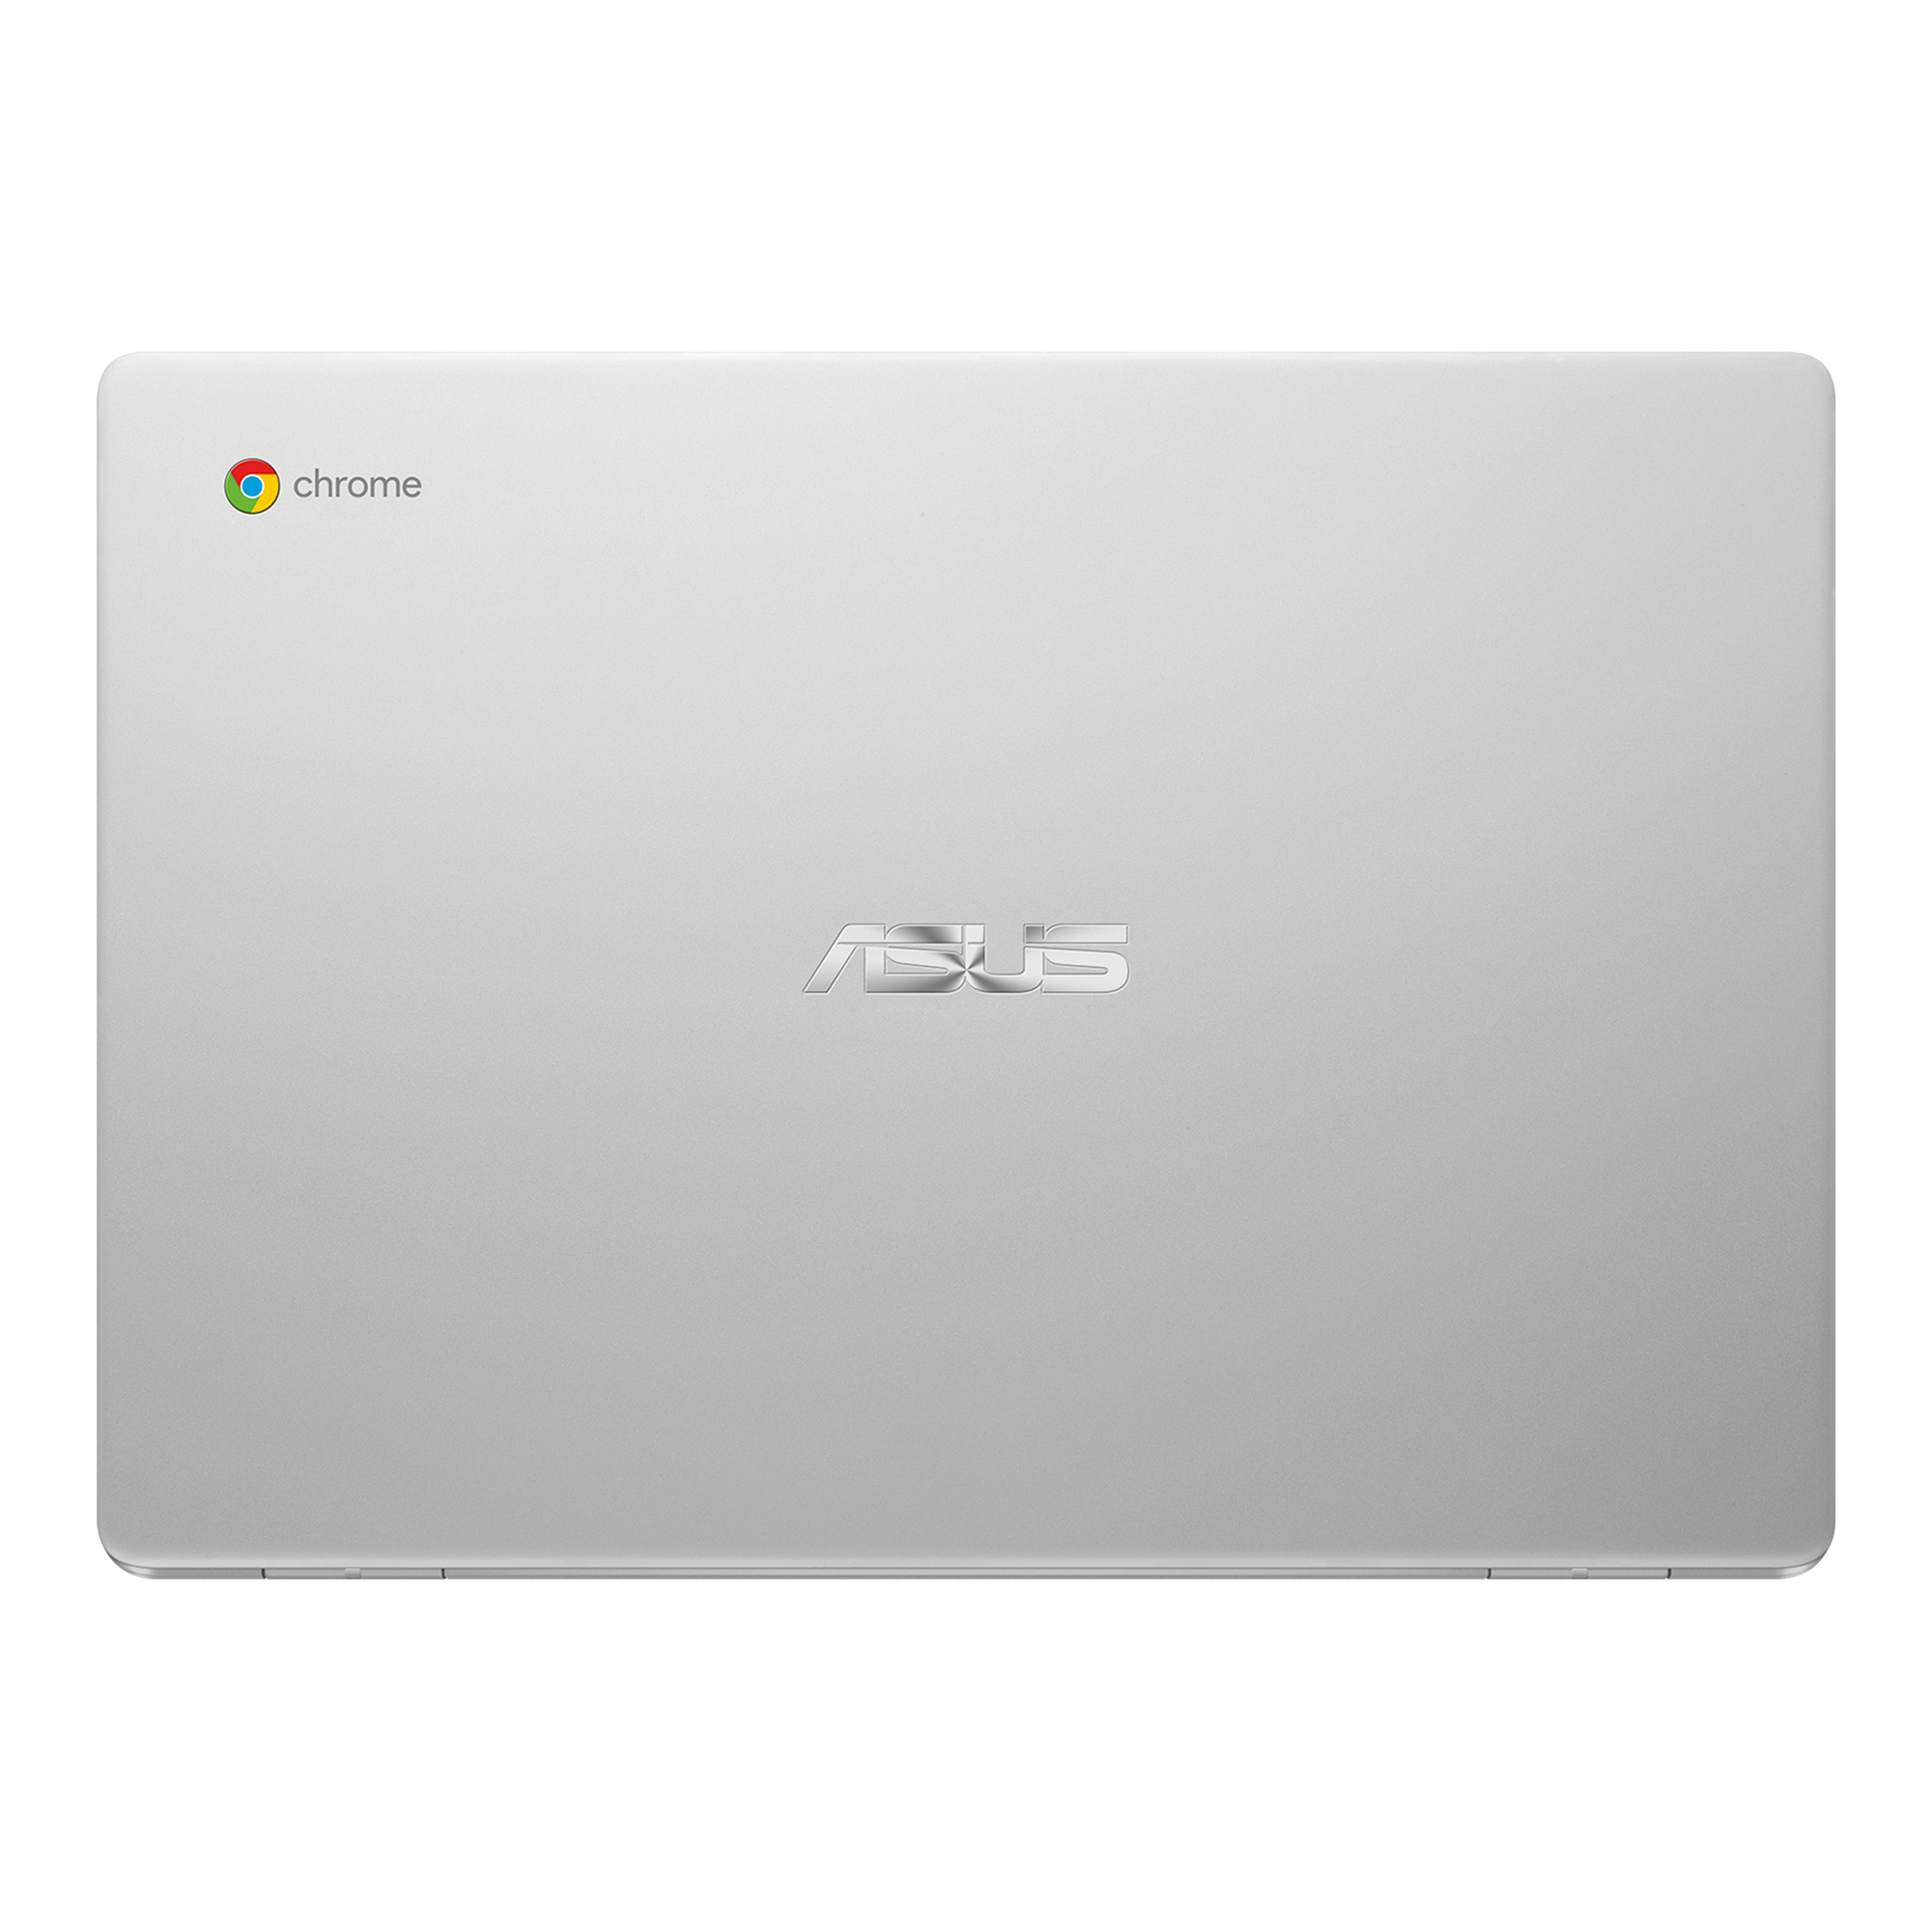 ASUS Chromebook C423｜Laptops For Work｜ASUS USA